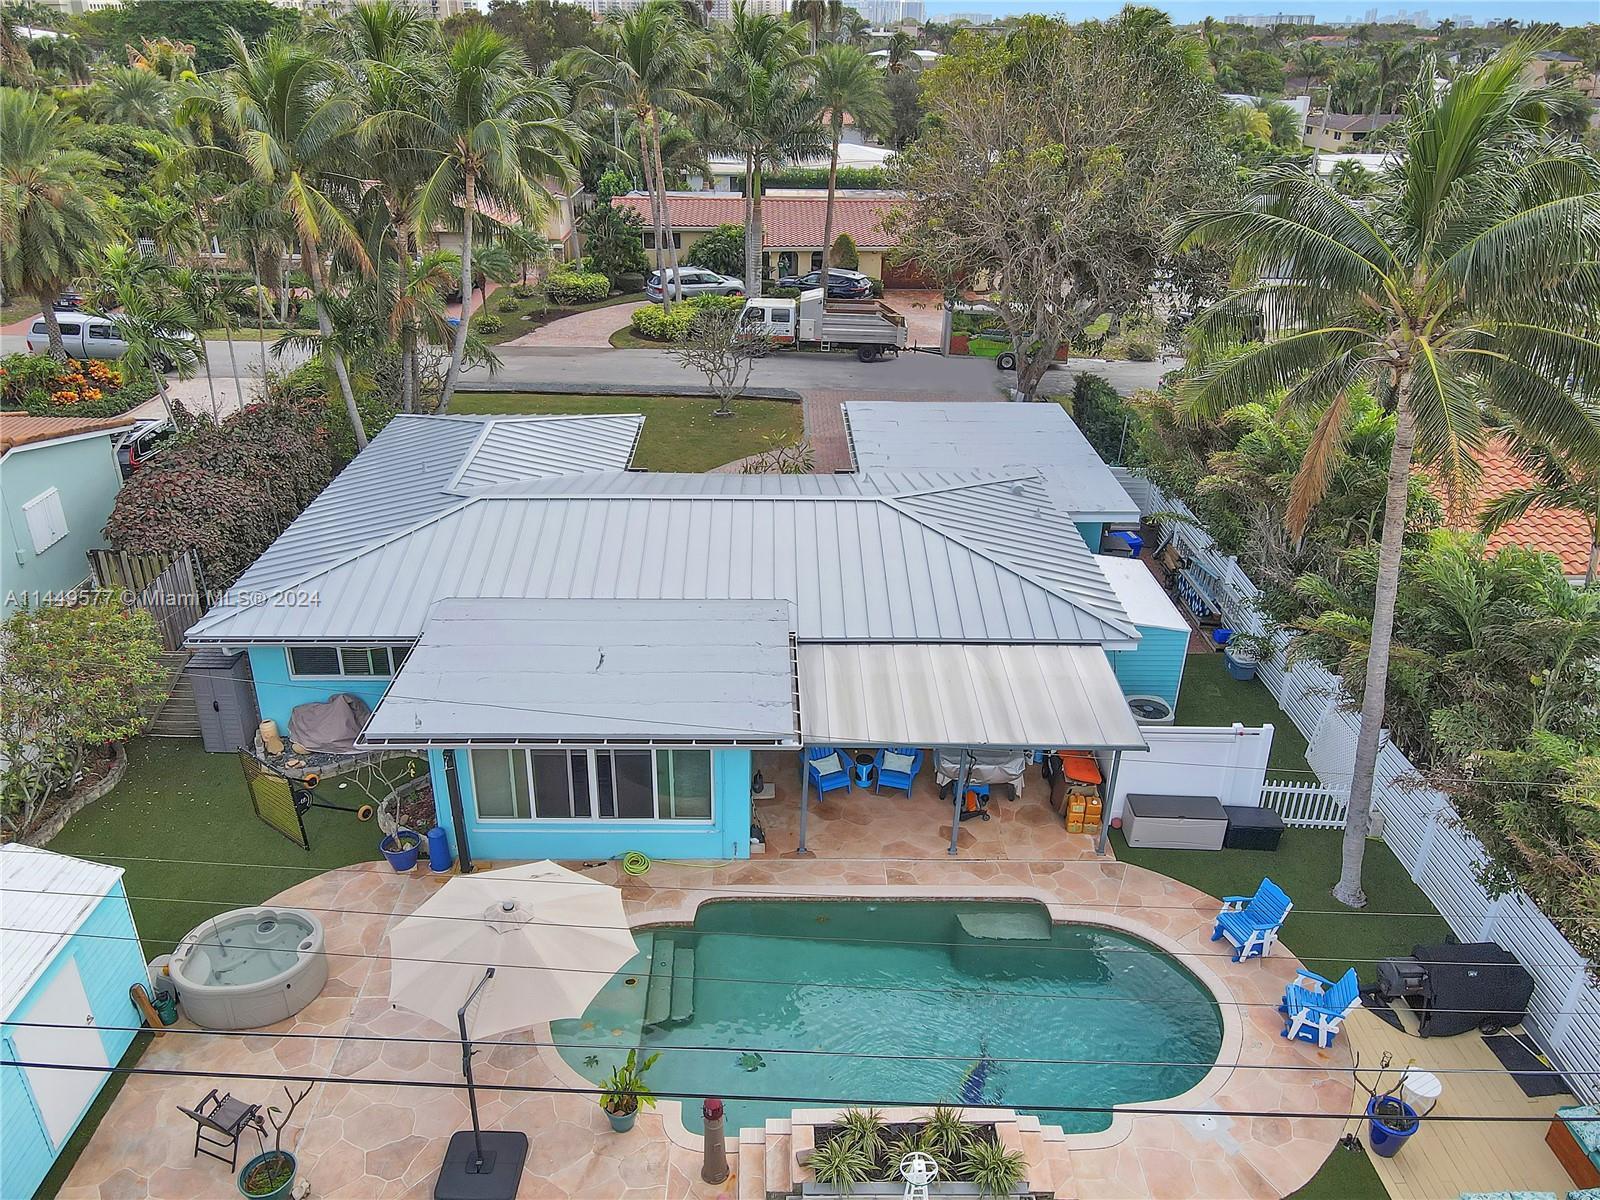 Spacious pool home in sought-after Bel-Air situated in charming beach town. Custom metal roof, flat 